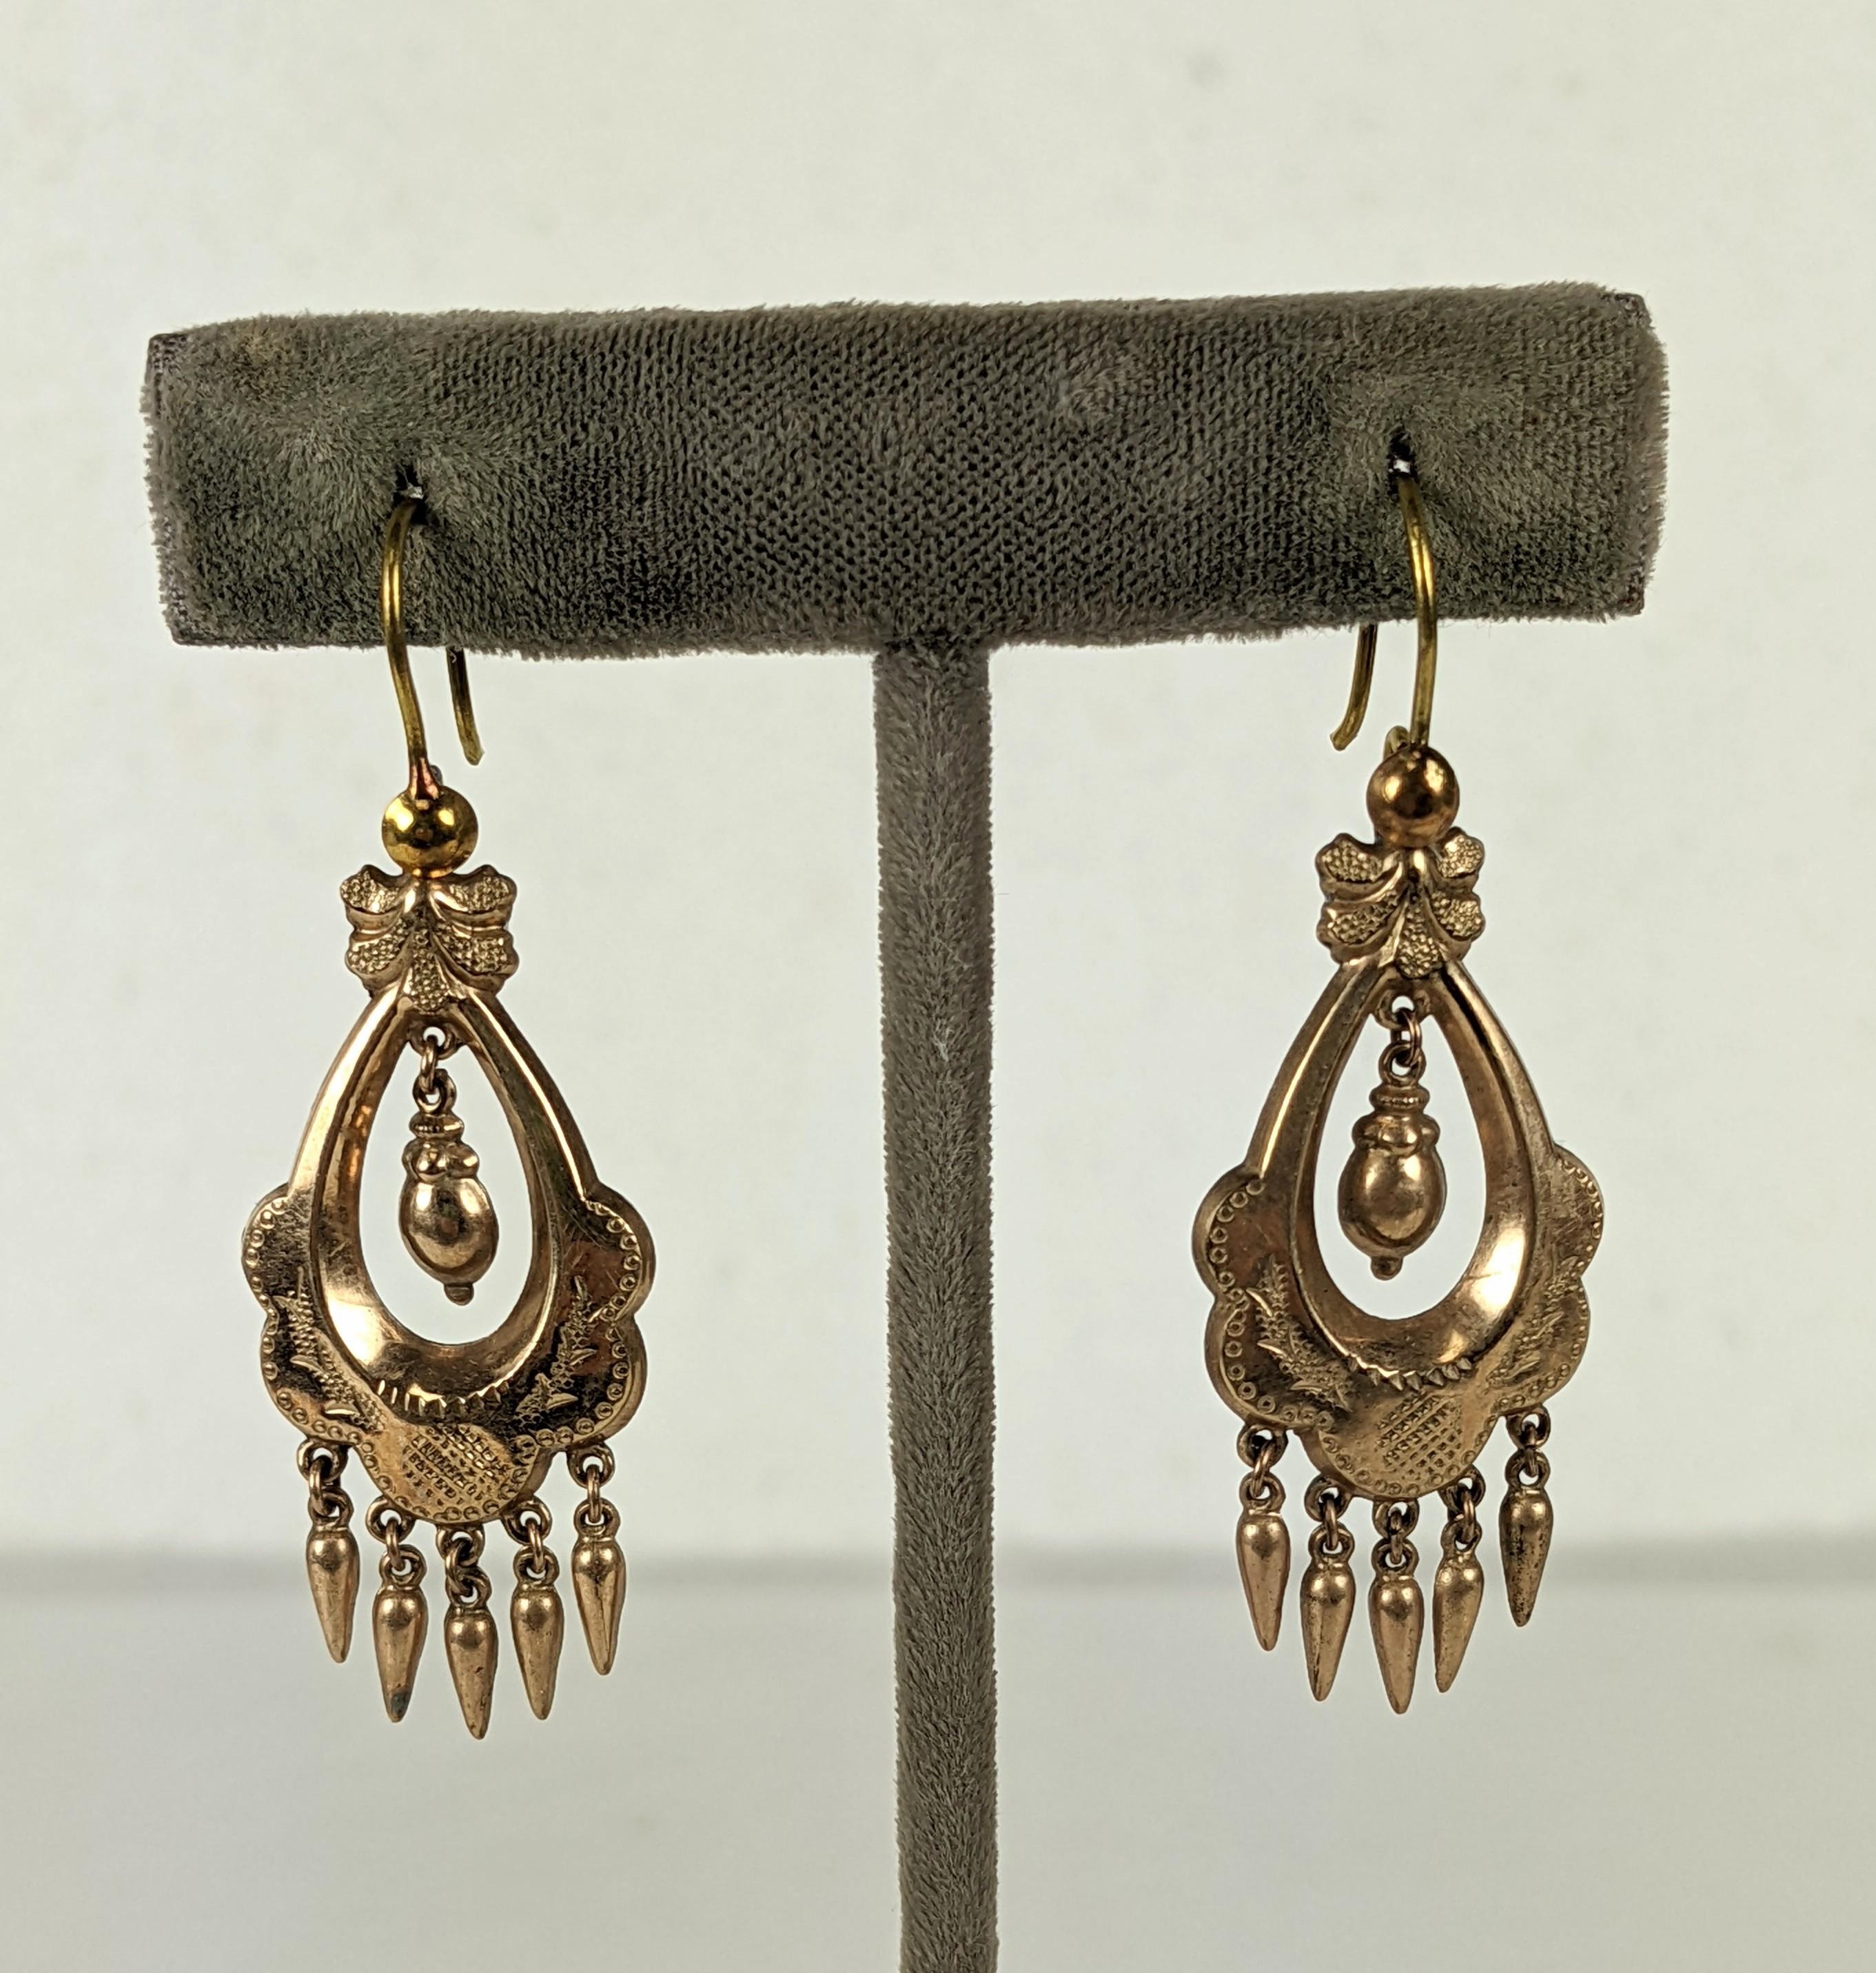 Victorian gold filled articulated long earrings in the Renaissance Revival taste. Gold filled metal has incised foliate motifs with two center hanging urns with small pendant drop fringes and french wire hooks. Excellent Condition. 1880's. 
L 1.3/4